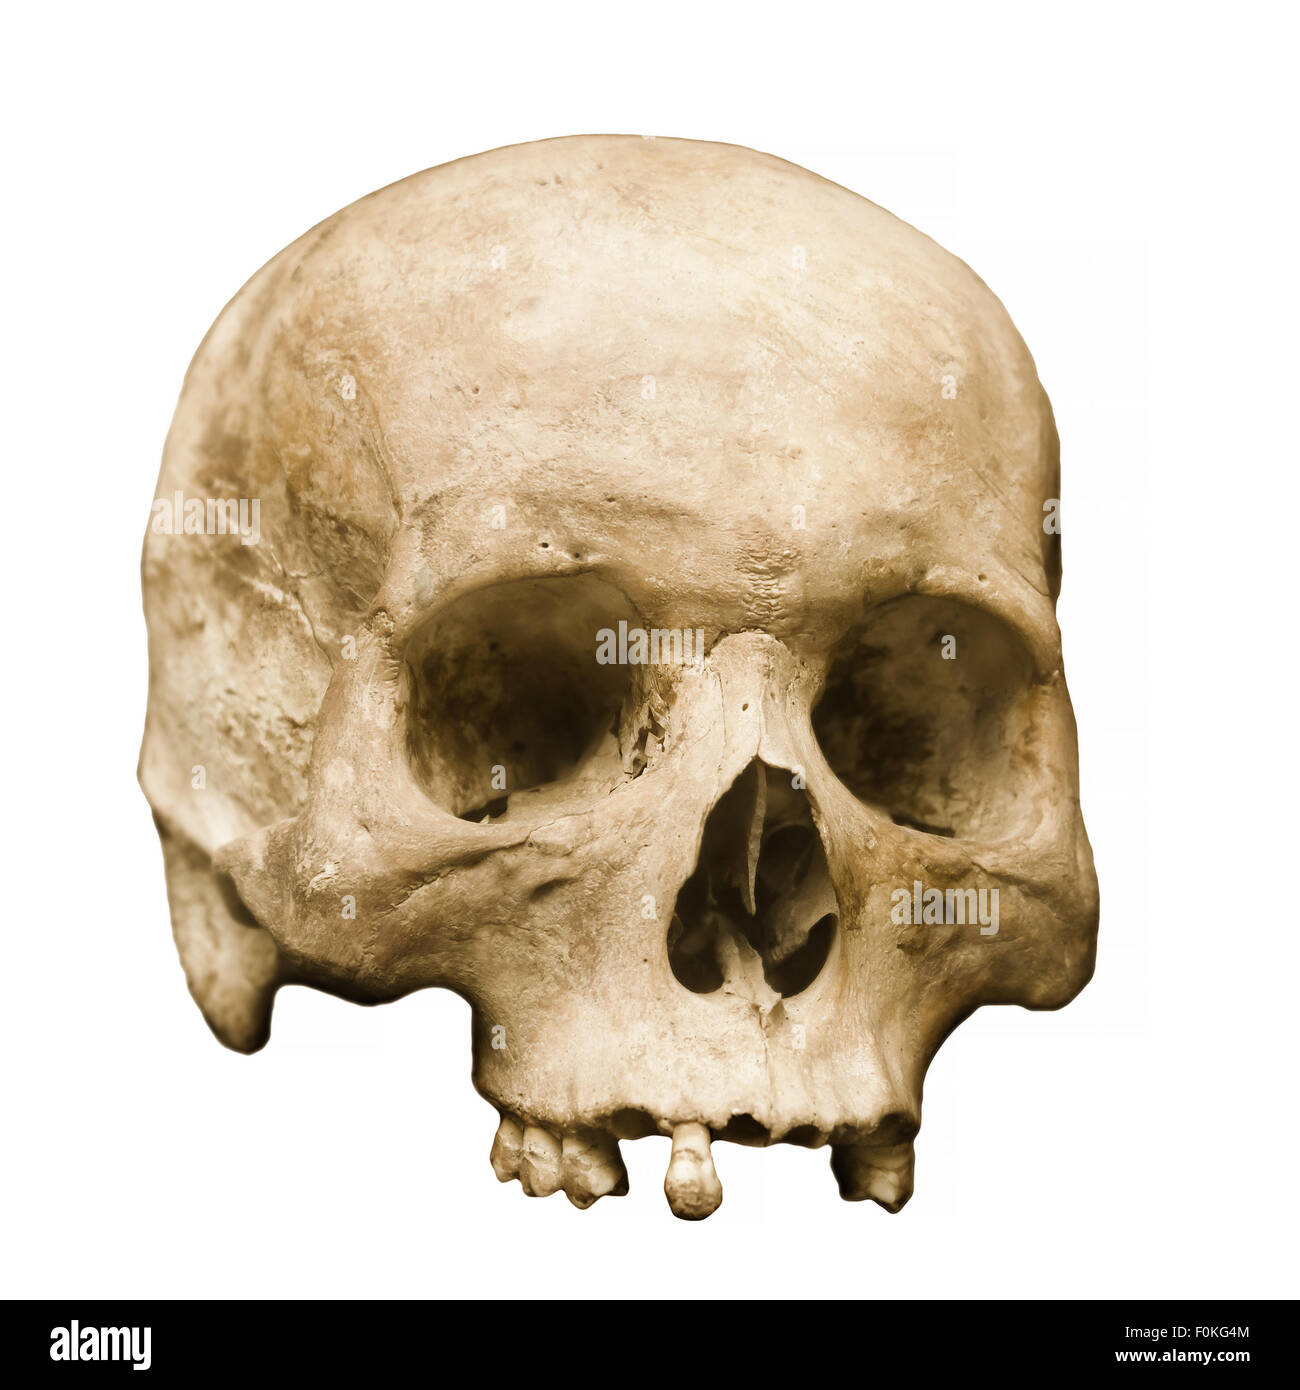 Highly detailed image of a human skull, minus the jaw, displayed against a white background.  Some teeth remain, and pores in th Stock Photo